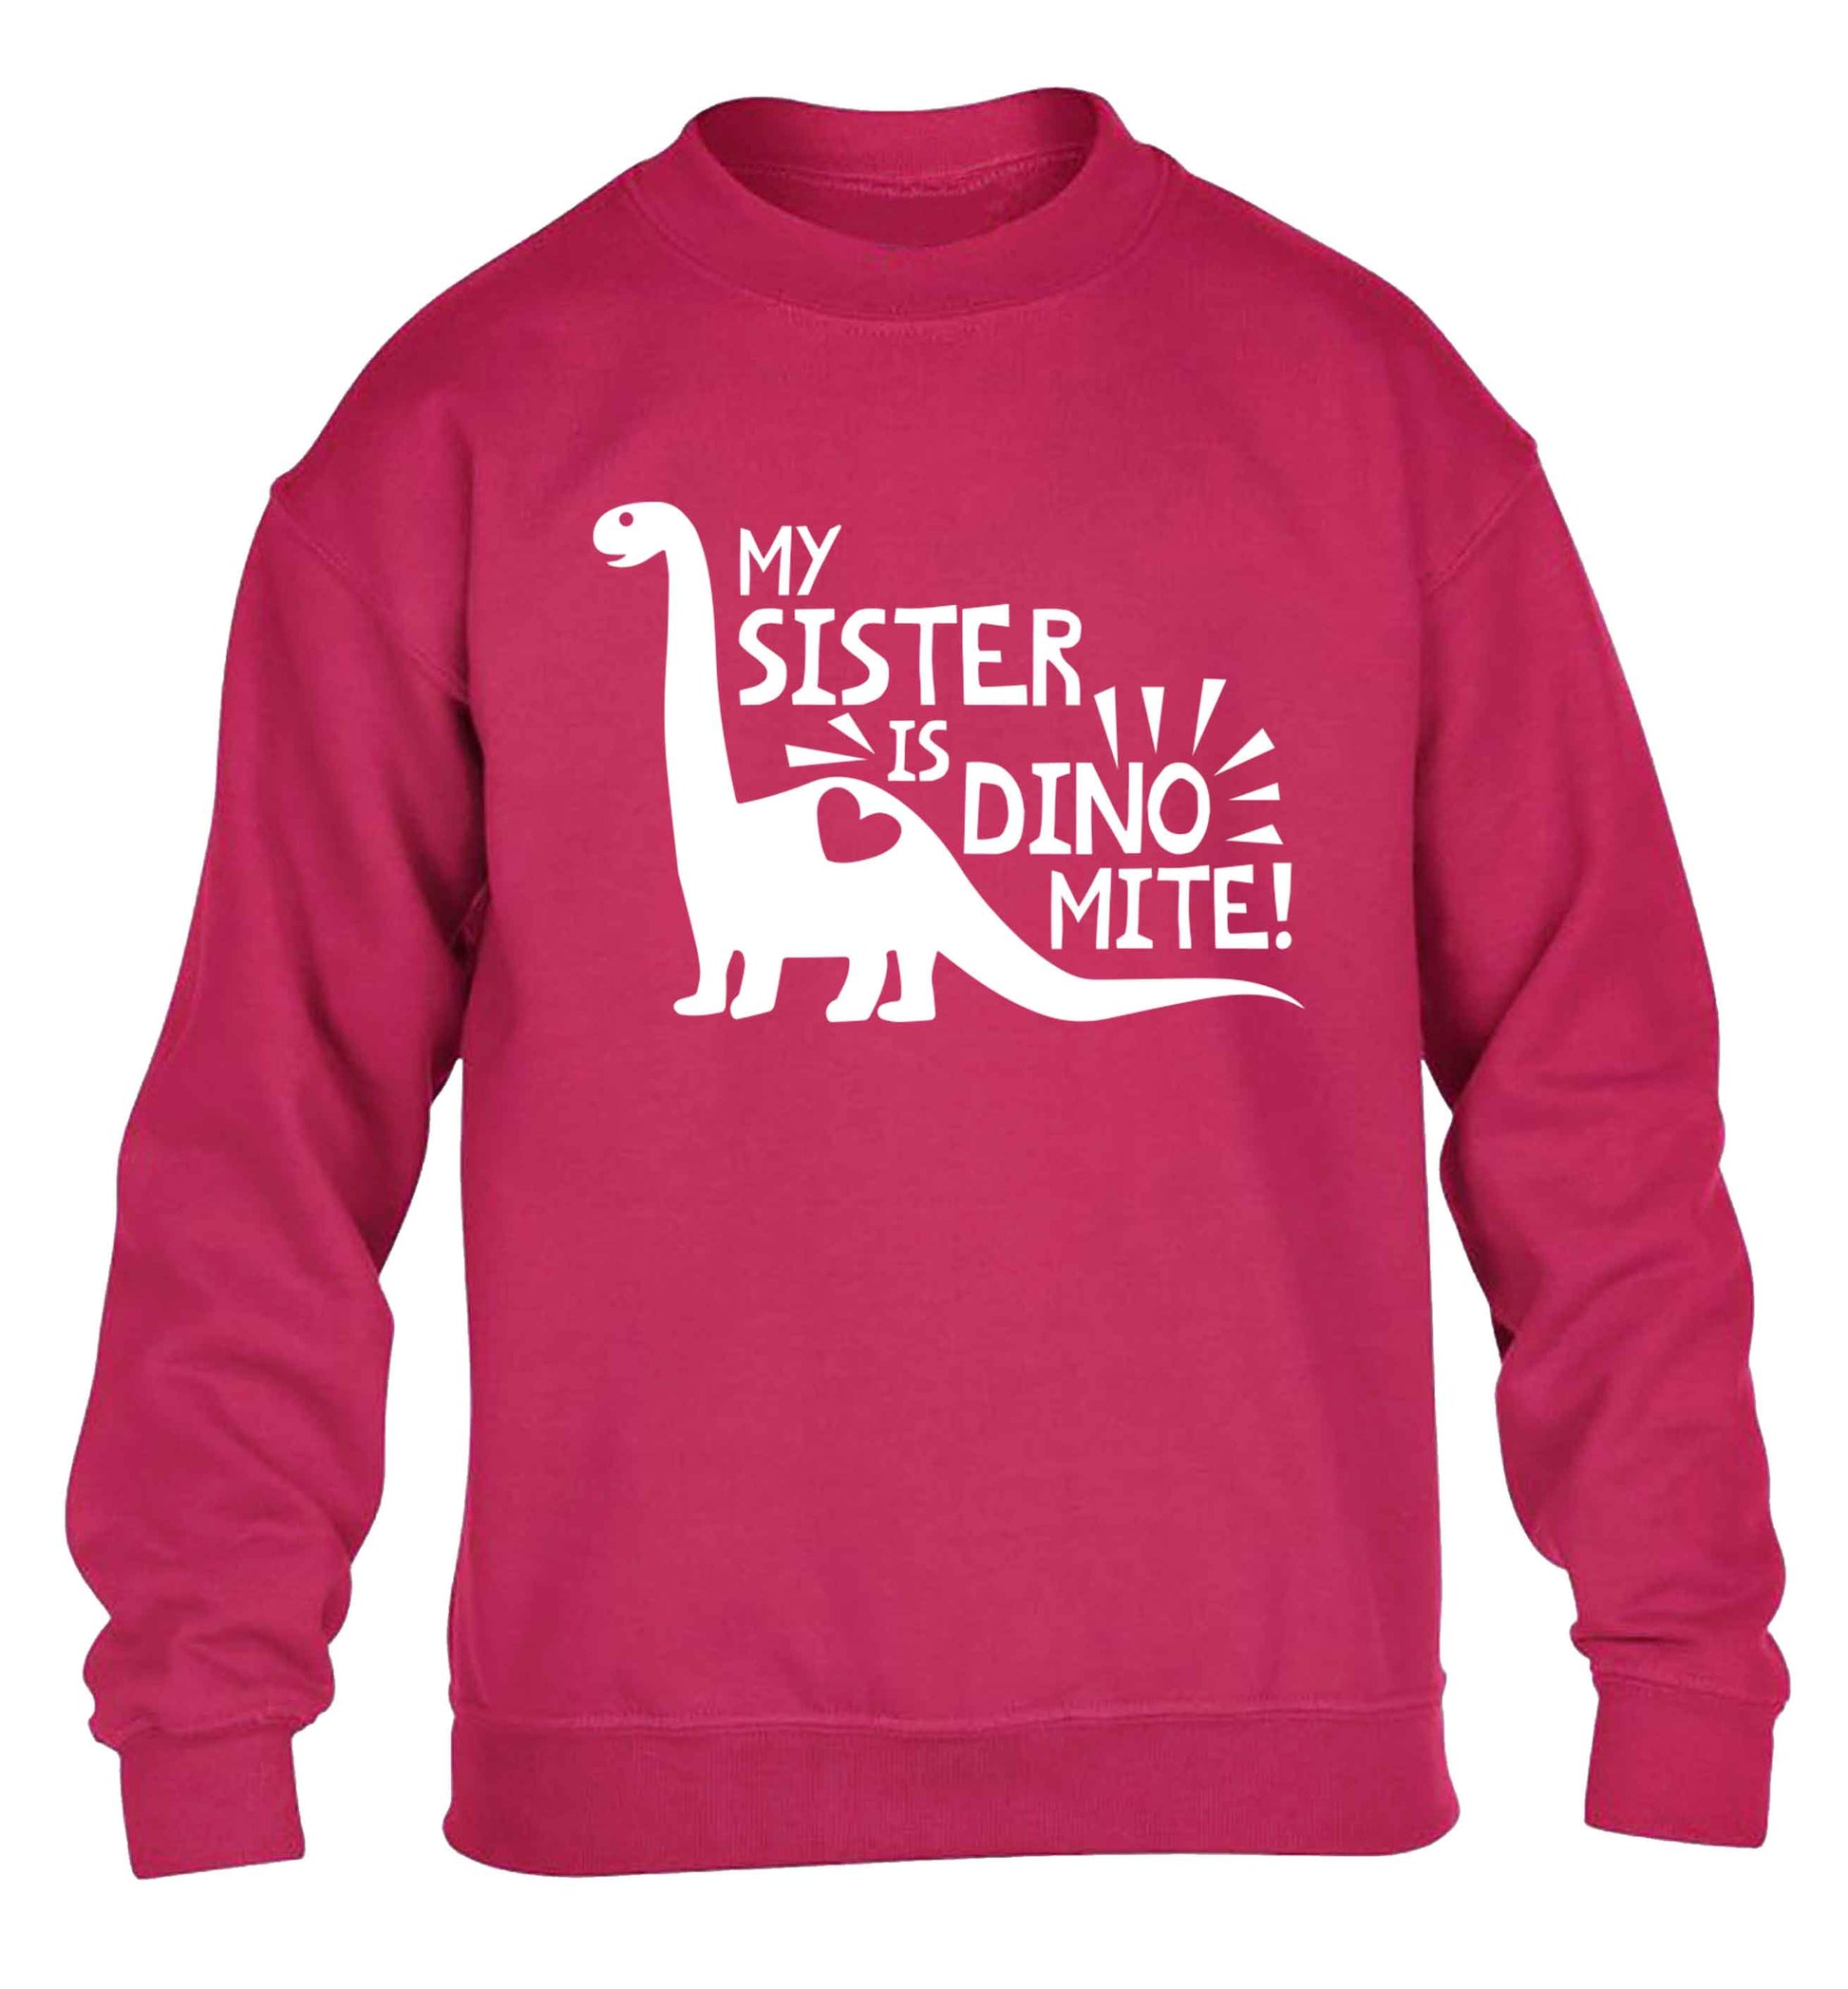 My sister is dinomite! children's pink sweater 12-13 Years